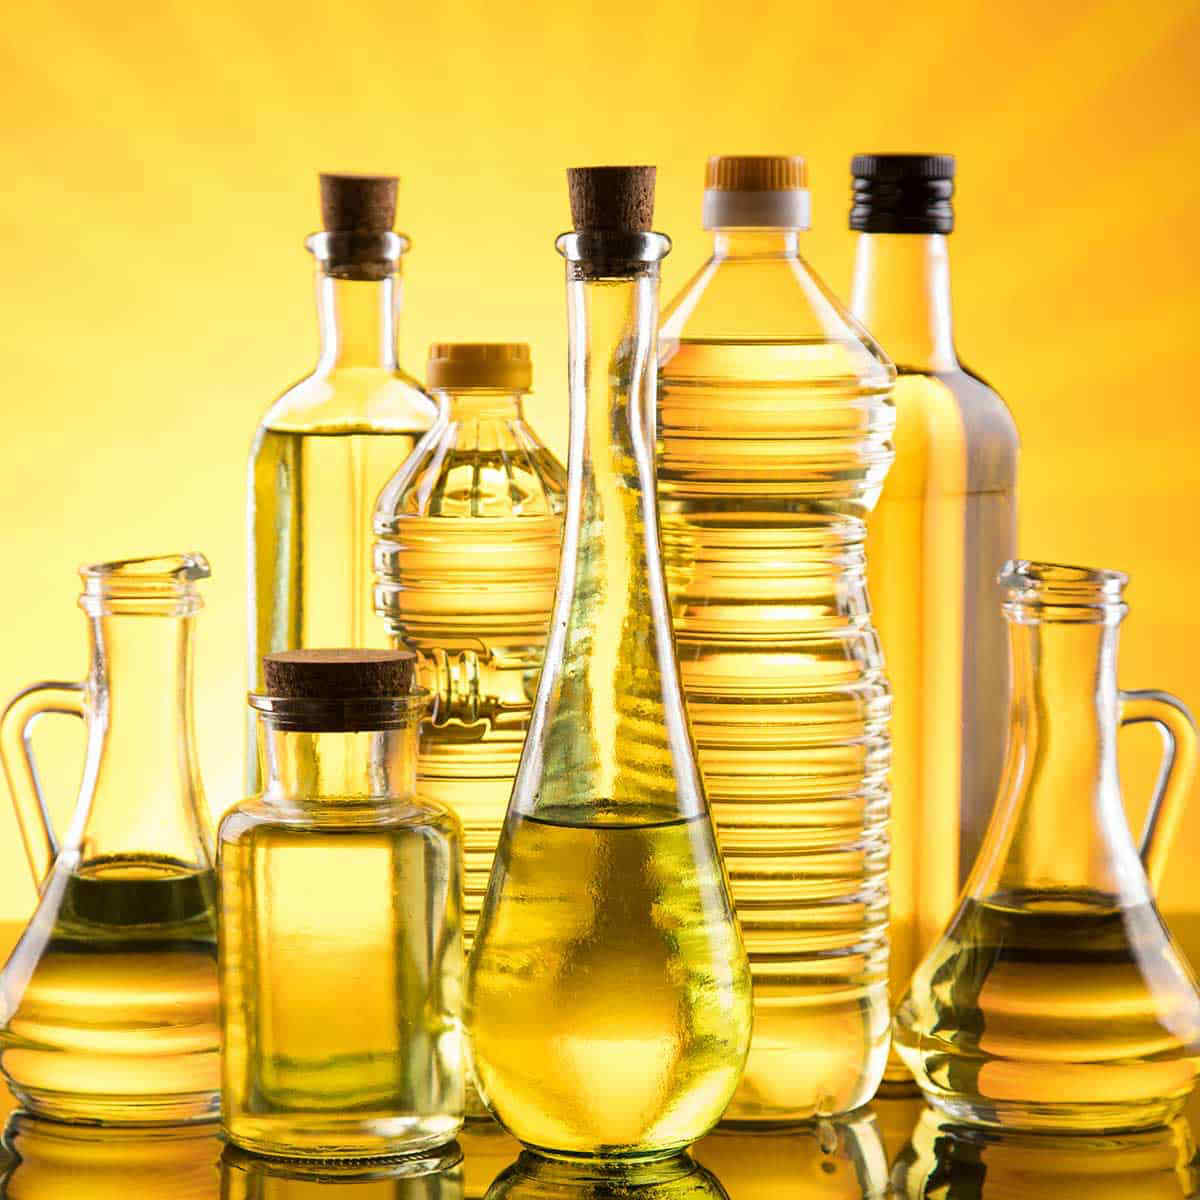 What Are Seed Oils? Are They Really Bad for Your Health?